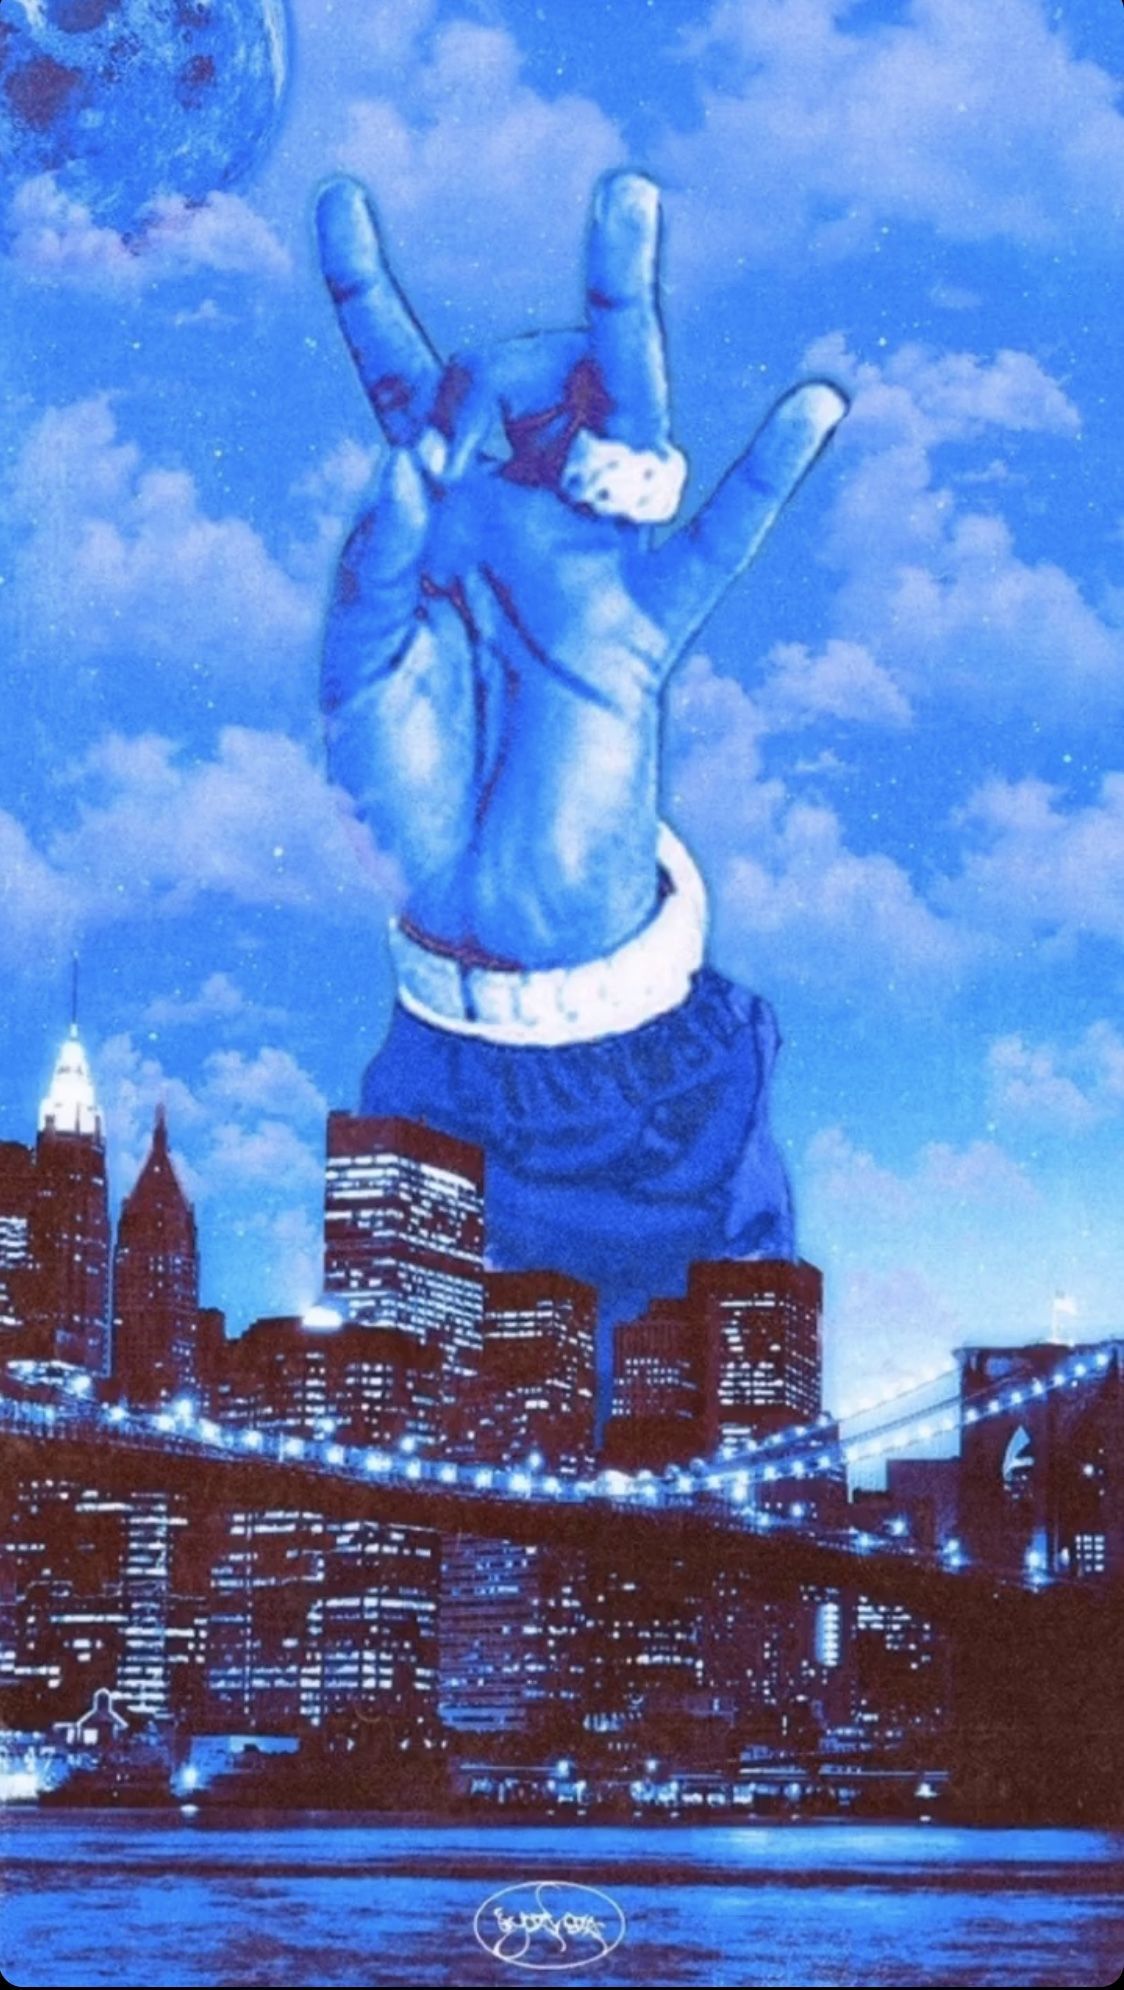 Blue iPhone wallpaper with a hand making the rock sign - Pop Smoke